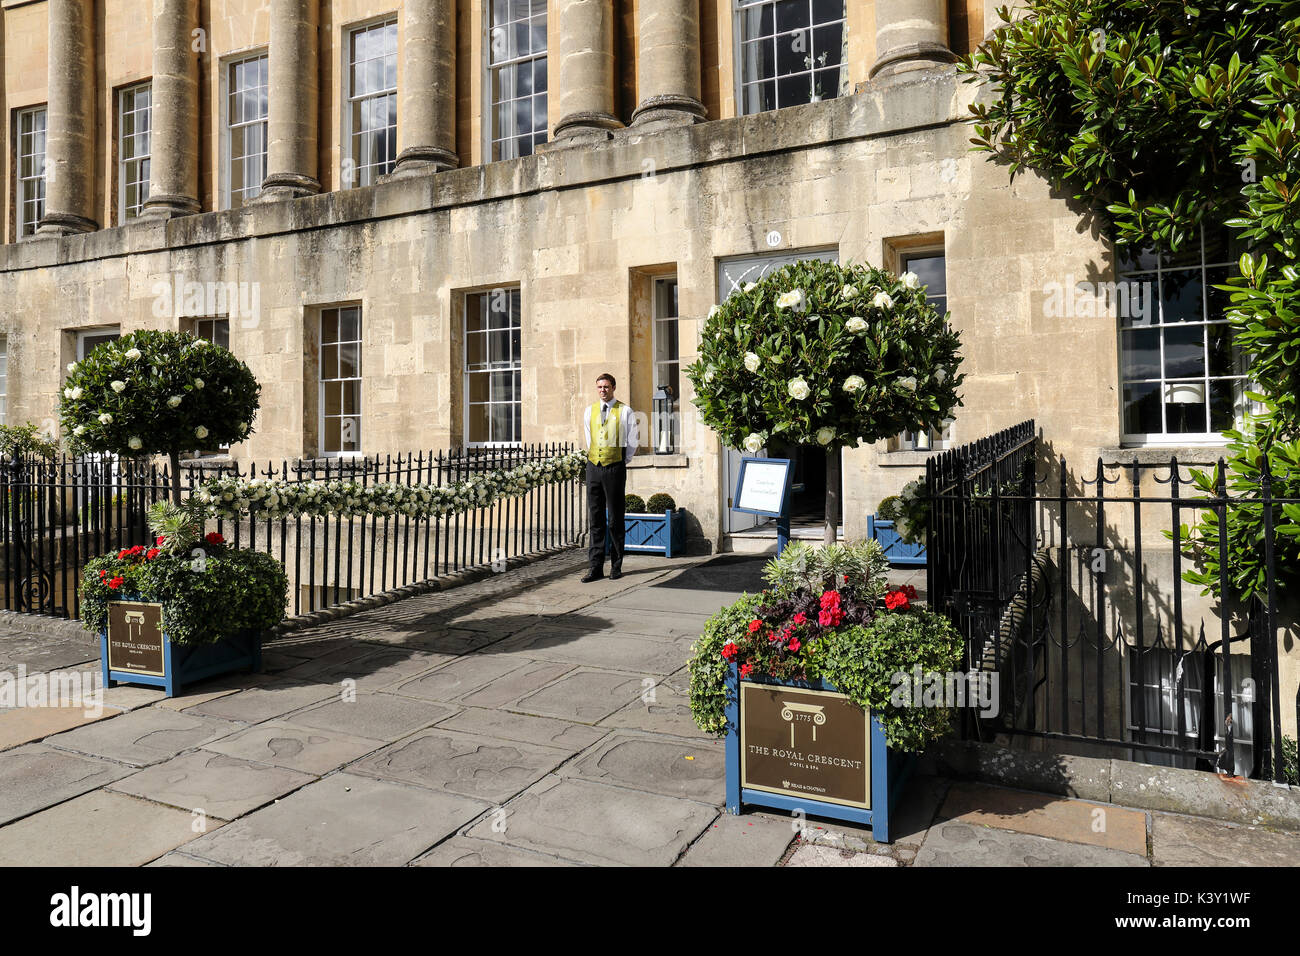 The Royal Crescent Hotel & Spa, City of Bath, Somerset, England, UK. A UNESCO World Heritage Site. Stock Photo